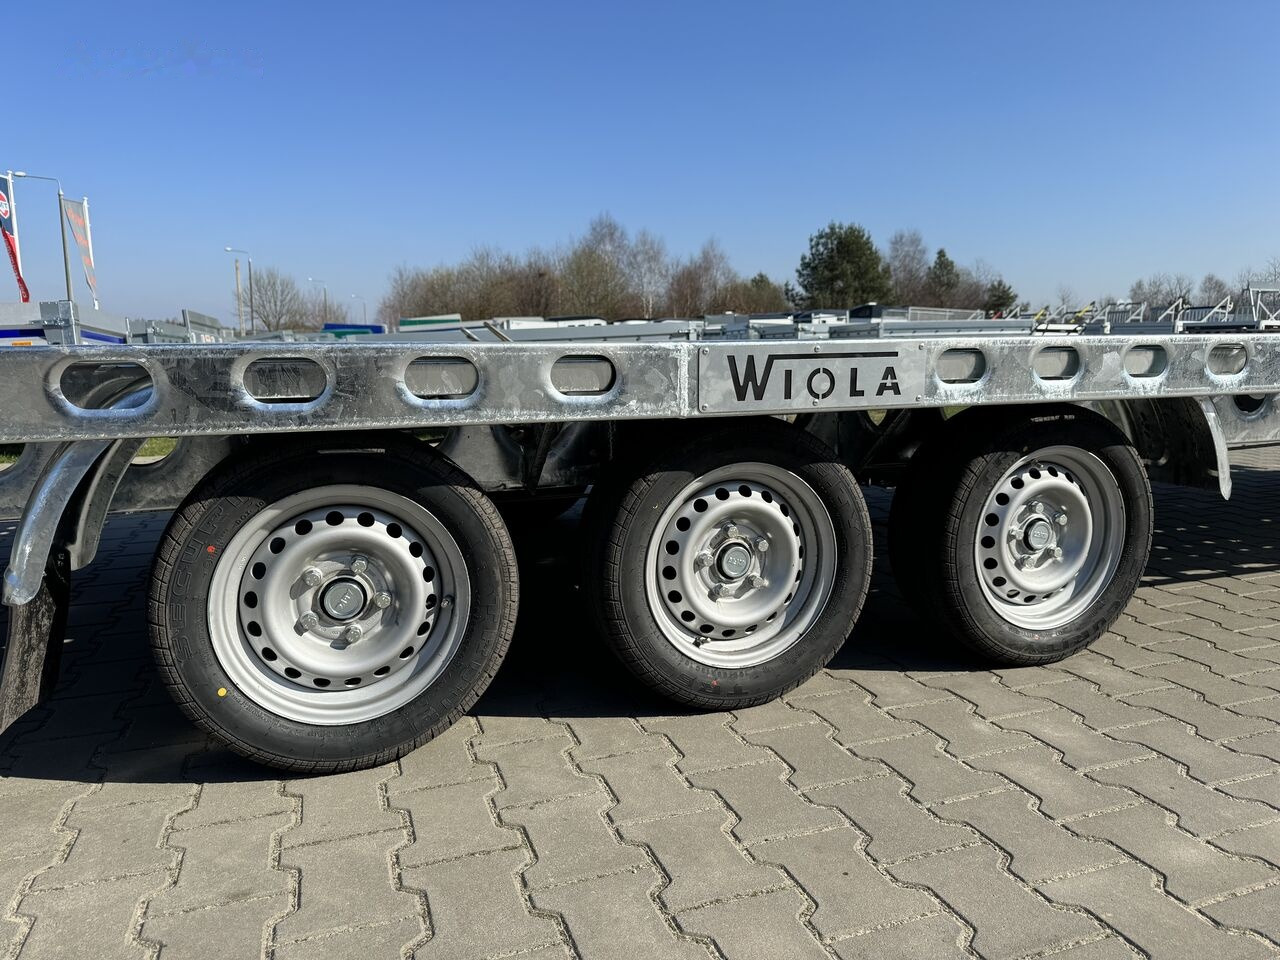 Remorque porte-voitures neuf Wiola L35G85 8.5m long trailer with 3 axles for transport of 2 cars: photos 8